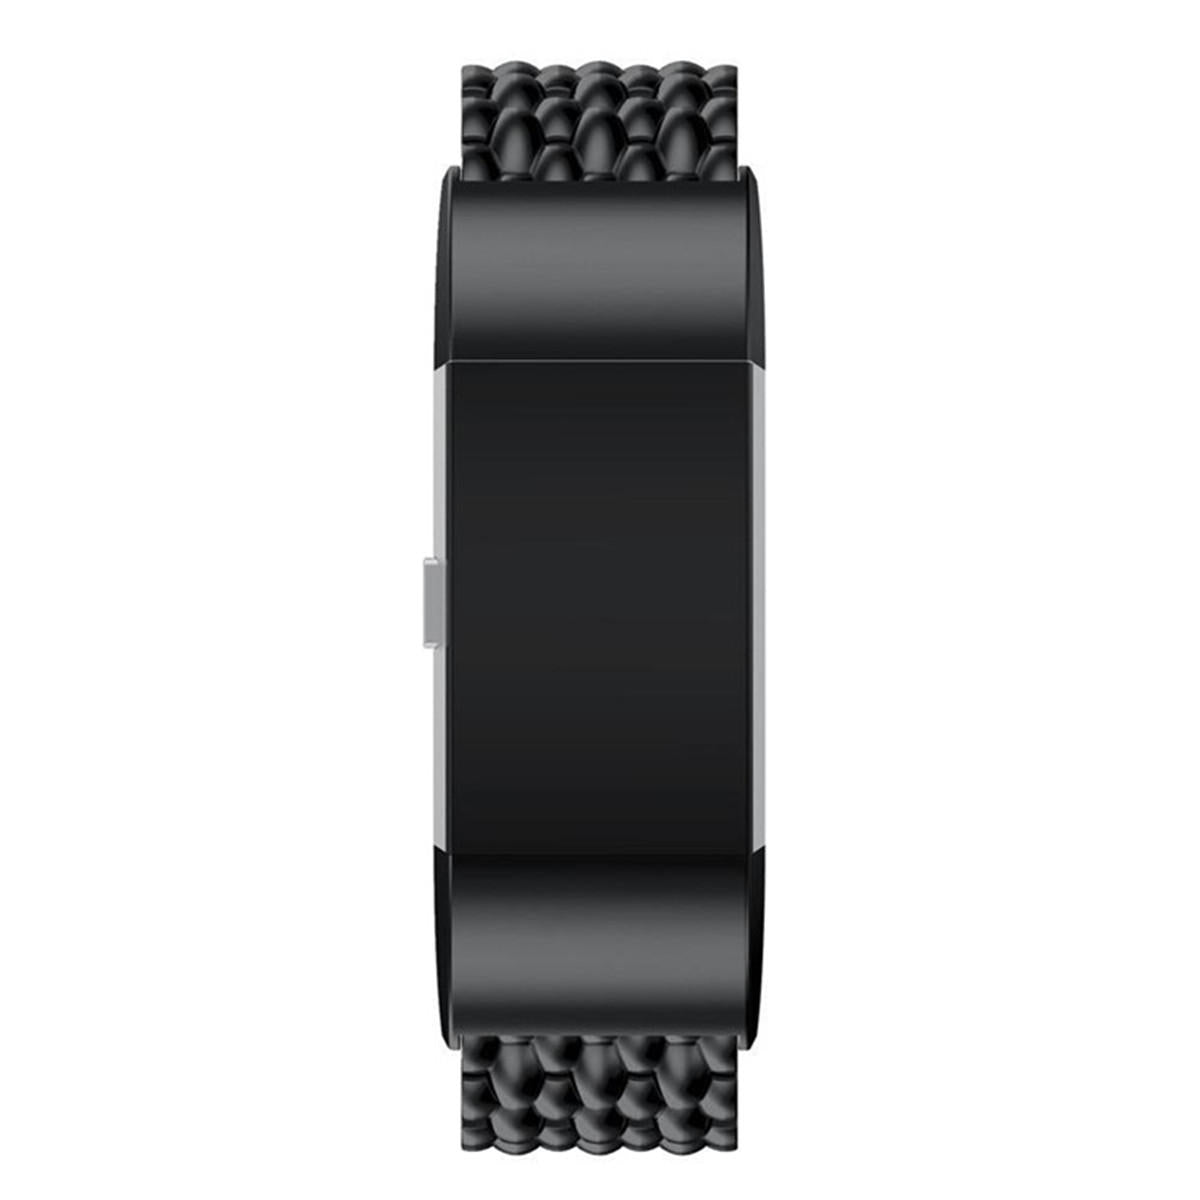 Replacement Screwless Metal Strap Stainless Wrist Band for Fitbit Charge 2